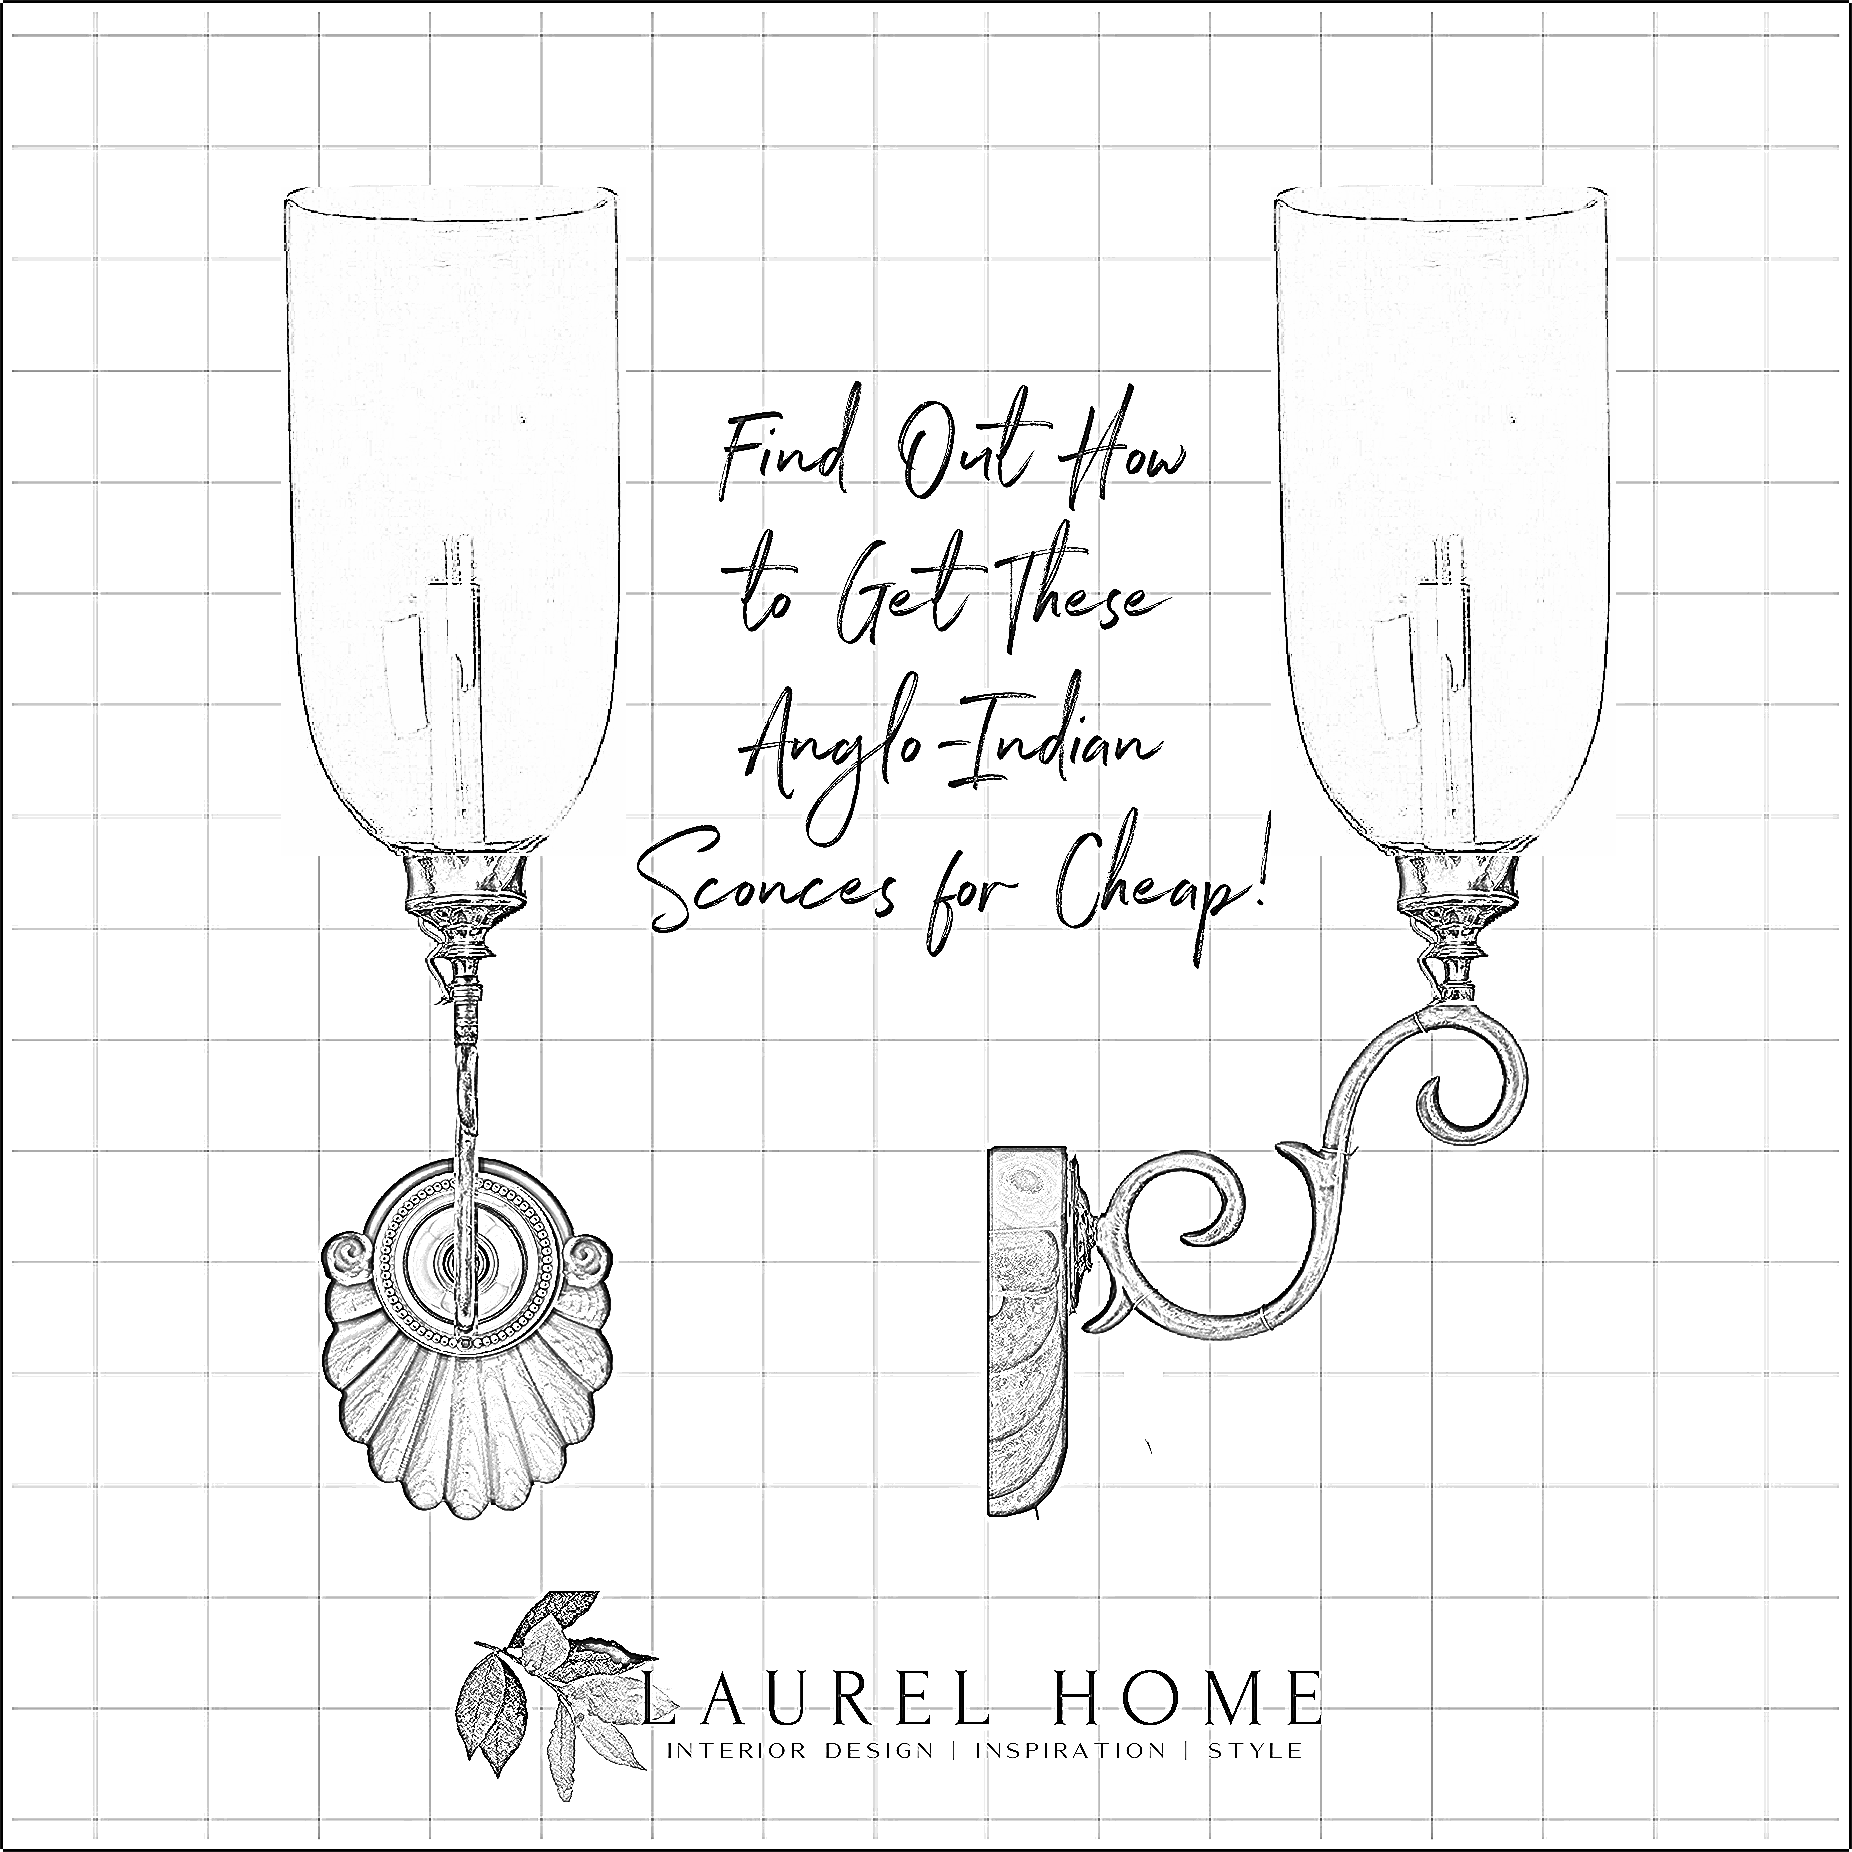 Anglo-Indian Sconces for cheap teal shells - sketch - I found an inexpensive way to make this gorgeous high-end lighting